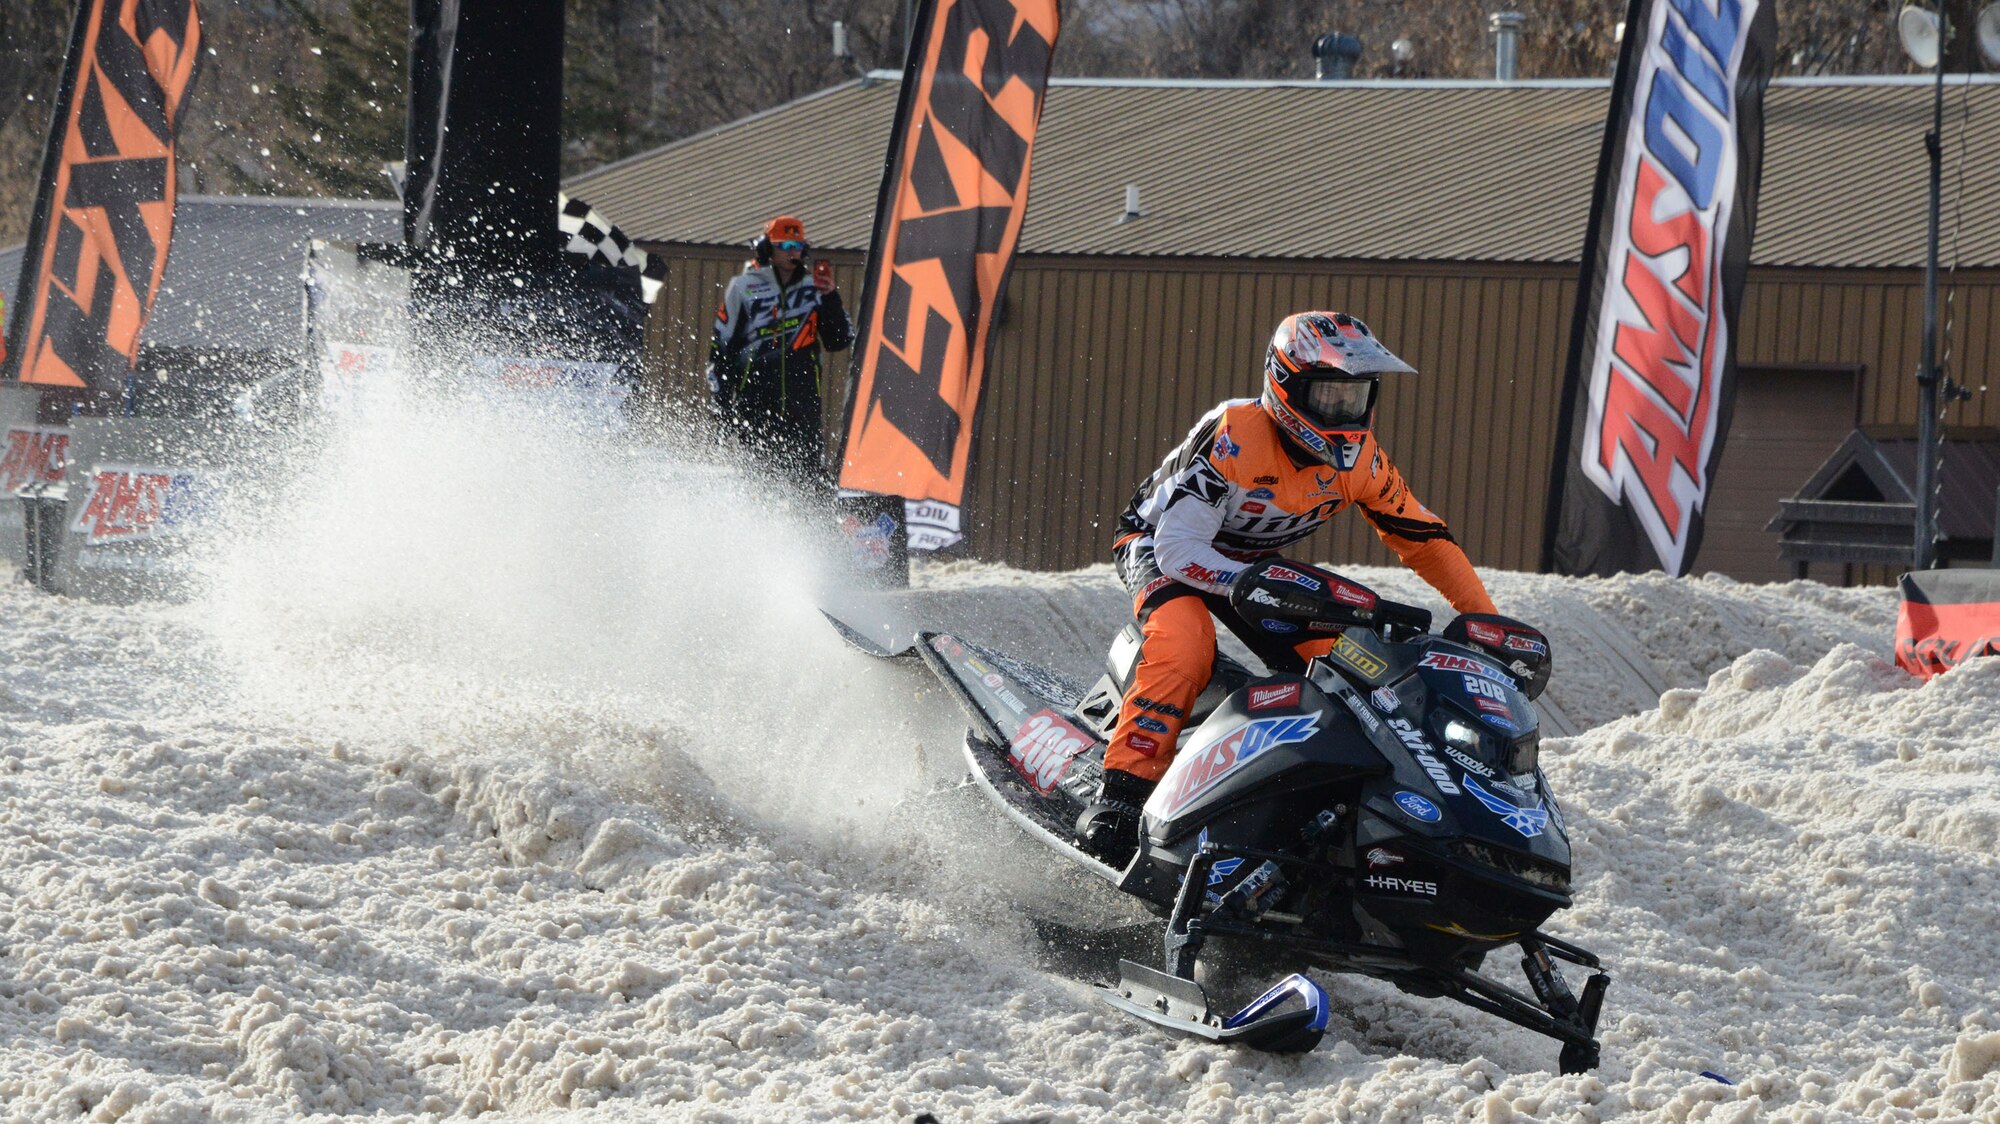 Air Force sponsored Snocross driver Hunter Patenaude, kicking out some snow while making it around the track during qualifying for the U.S. Air Force Snocross National in Deadwood, South Dakota.